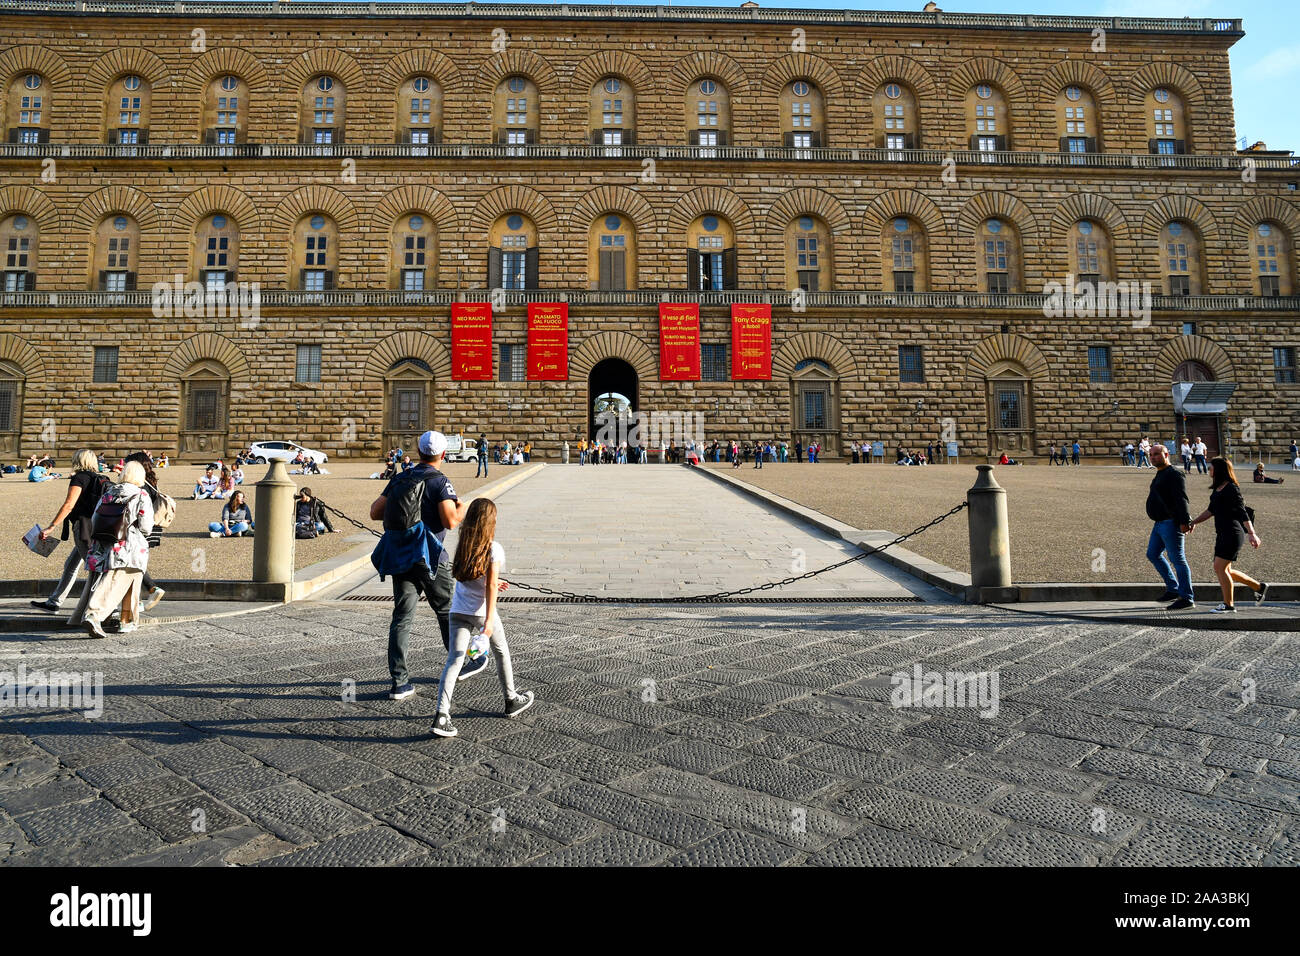 Façade of Palazzo Pitti, a famous museum complex in the historic centre of Florence, Unesco World Heritage Site, with tourists, Tuscany, Italy Stock Photo